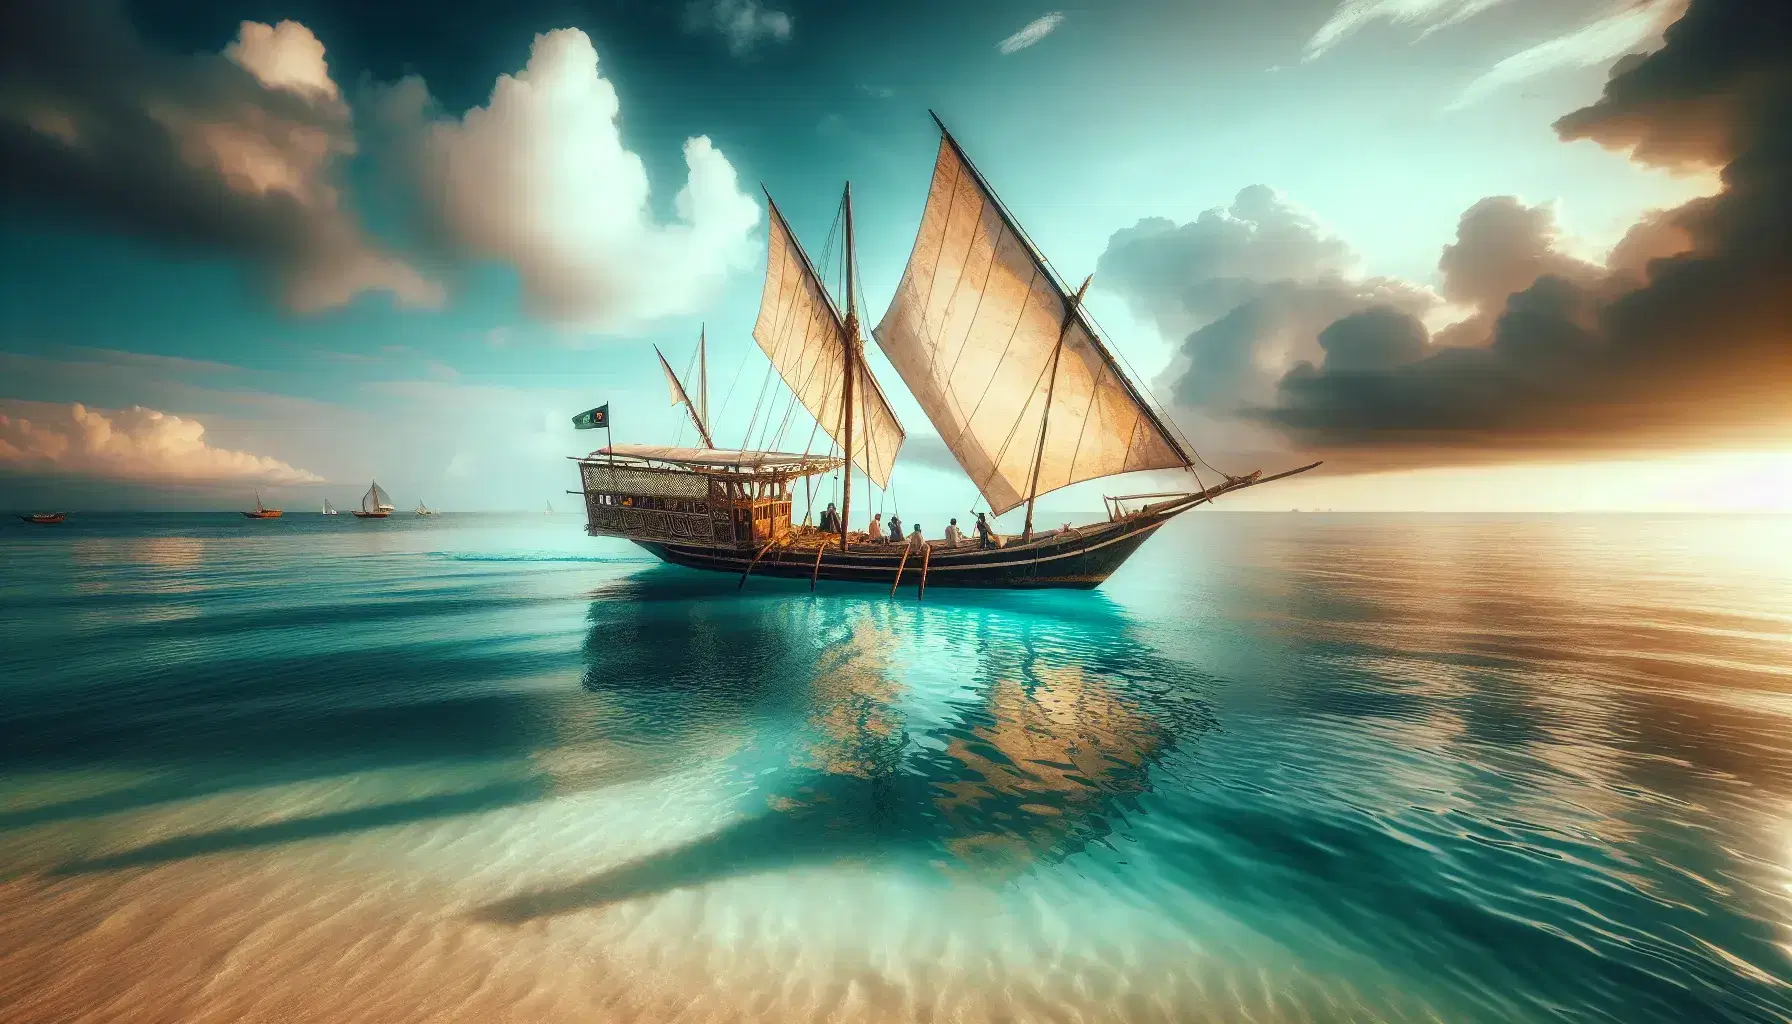 Traditional dhow boat with sails glides on the Indian Ocean near Zanzibar's coast, with a sunset reflecting on calm waters and Stone Town in the distance.